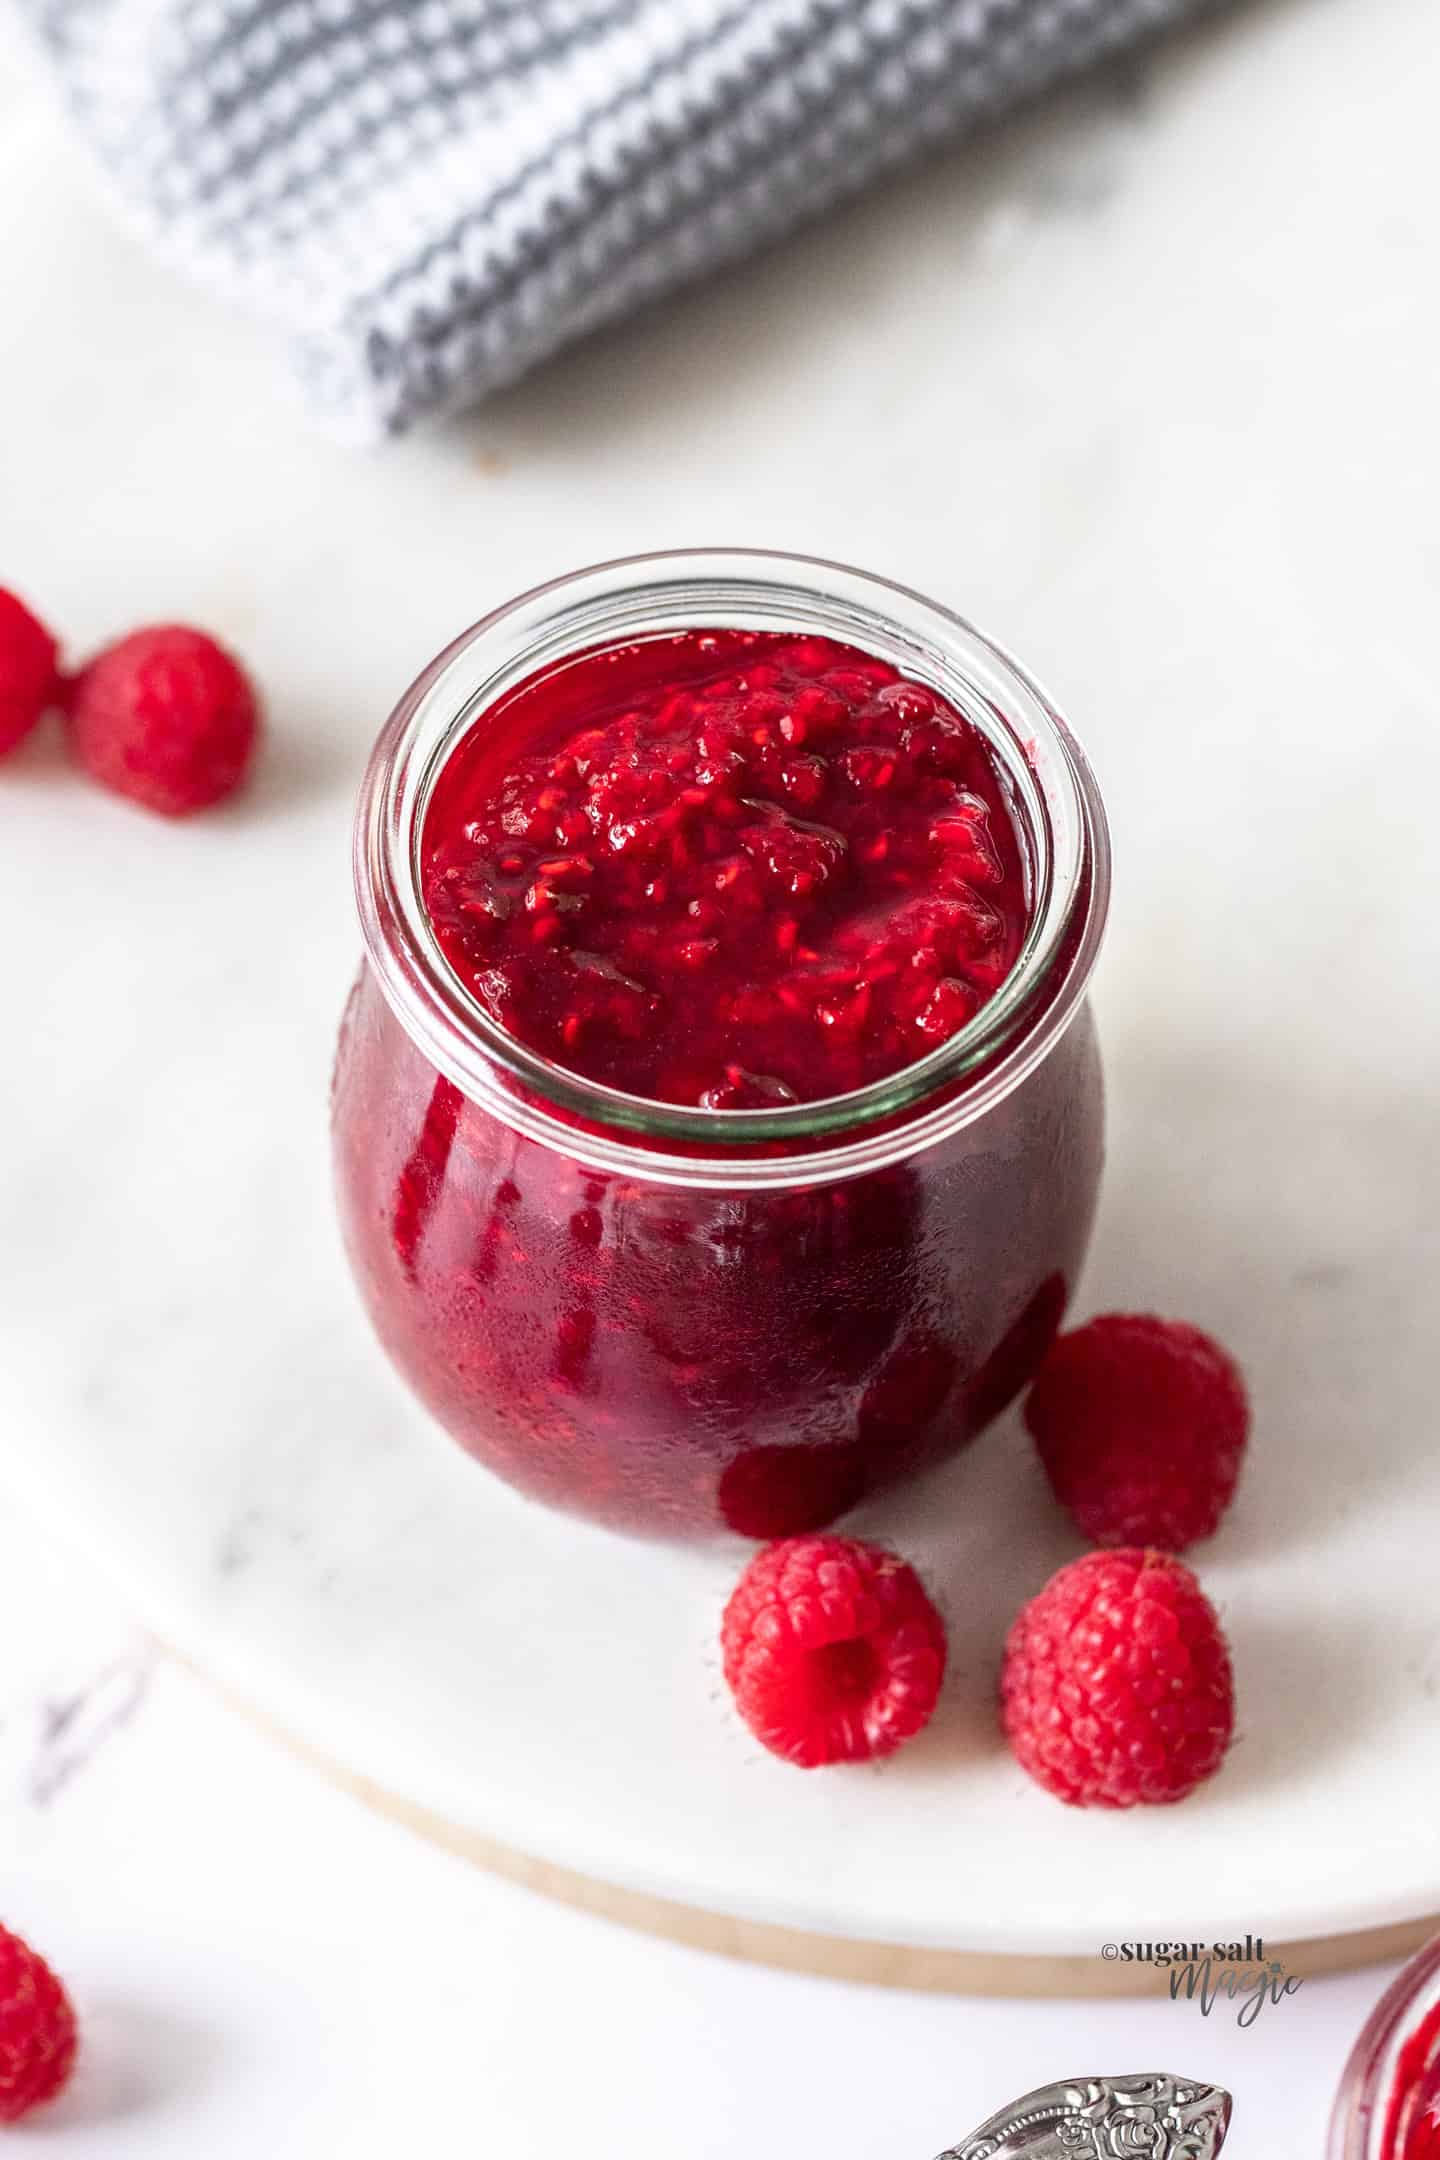 A small glass pot filled with raspberry compote. Fresh raspberries around.